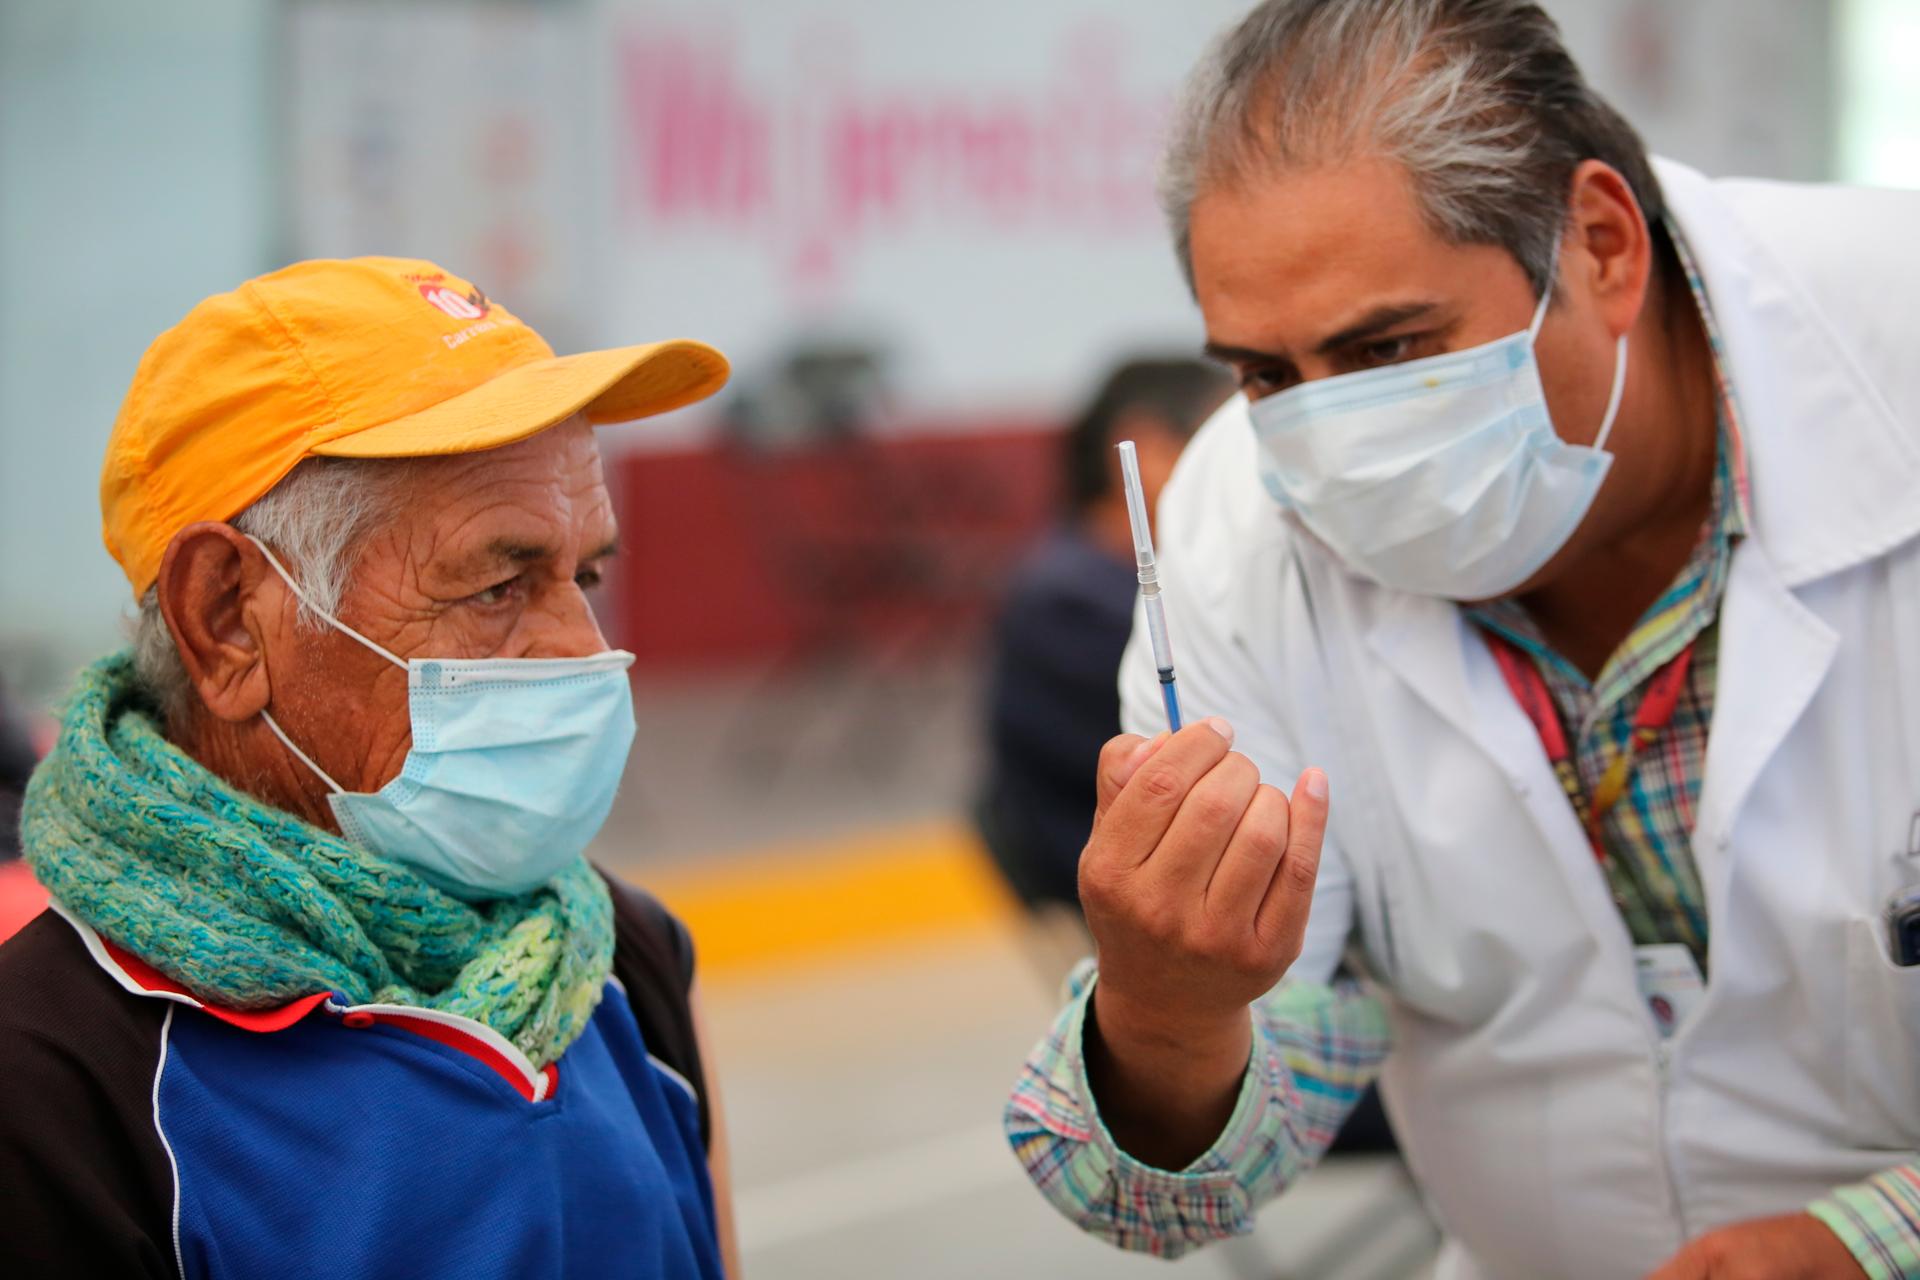 A nurse shows an elderly man a syringe prepared with a dose of the Sinovac COVID-19 vaccine, before he is inoculated at the Americas Cultural Center in Ecatepec, Mexico, April 3, 2021.